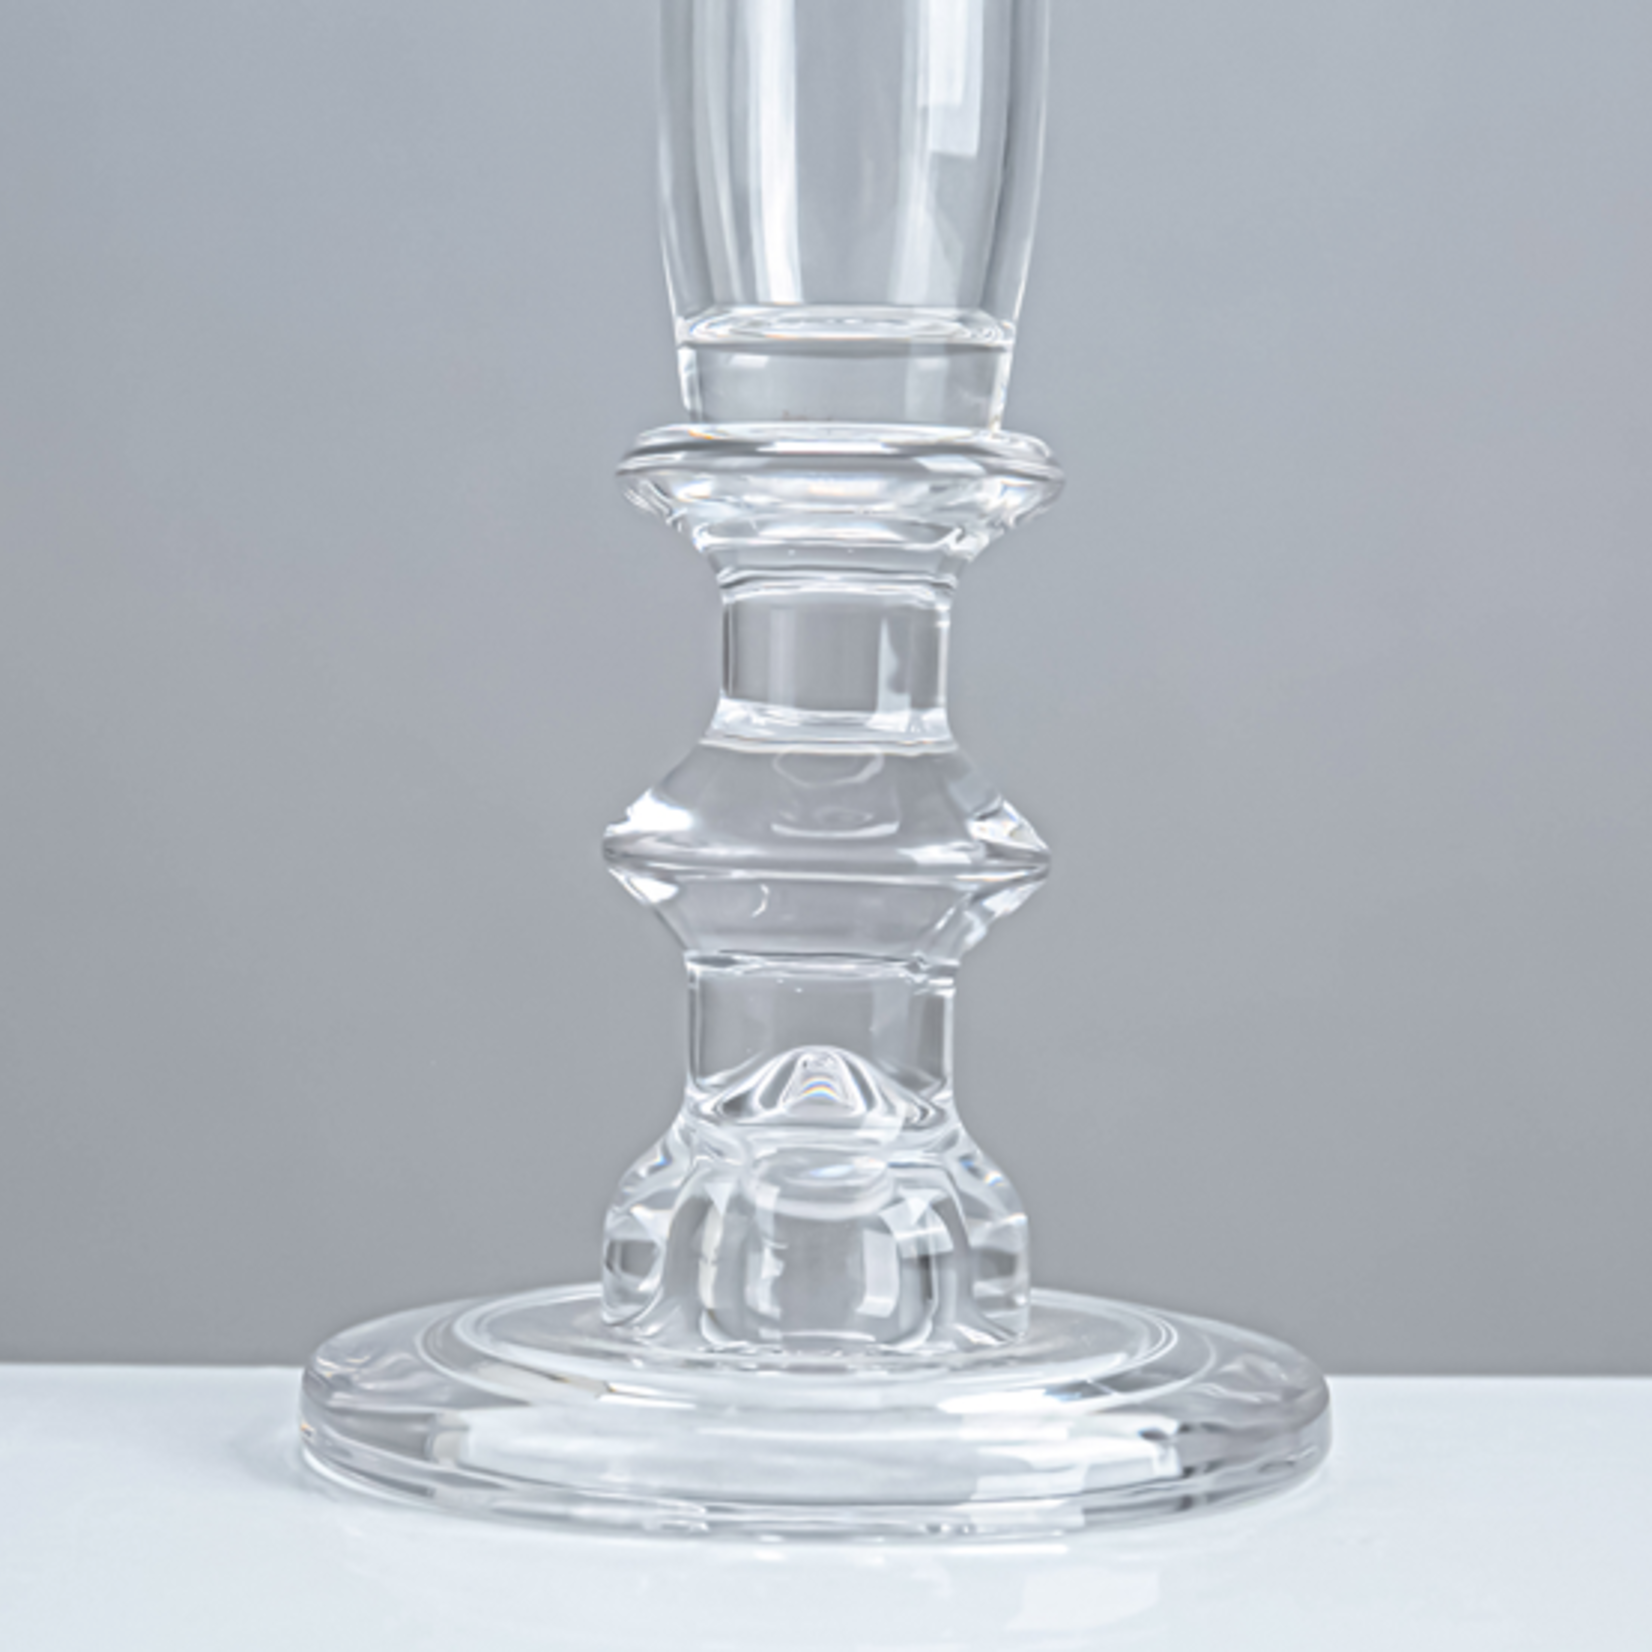 7.5”H X 4.5” CRYSTAL GLASS CANDLEHOLDER FOR PILLAR AND/OR TAPER